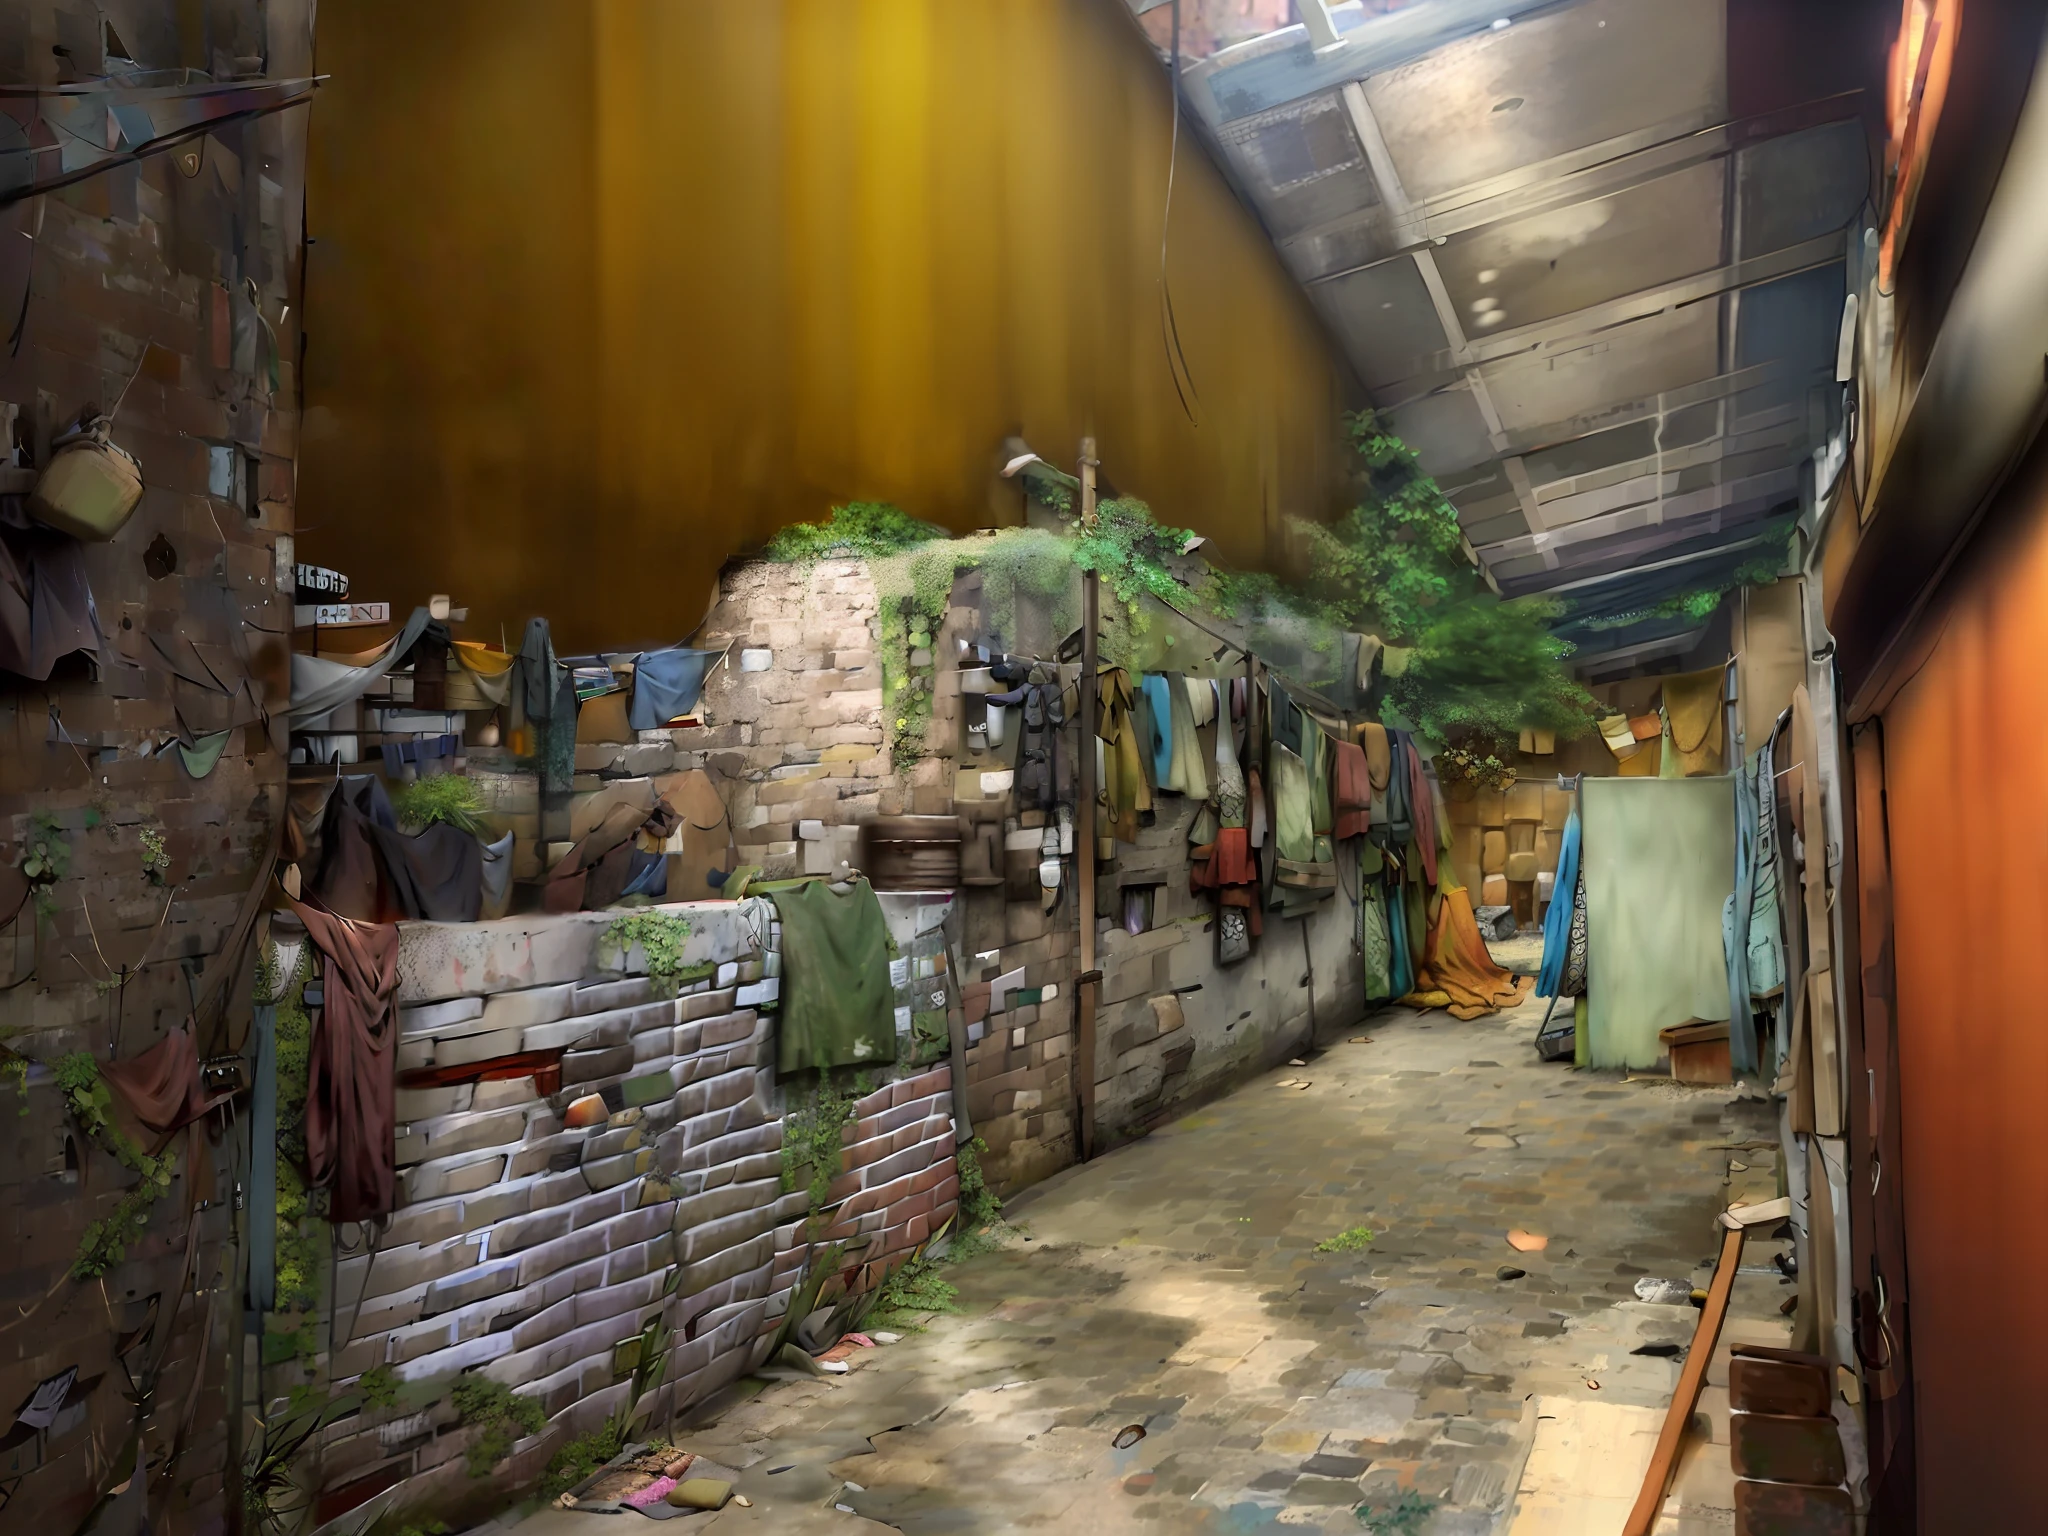 there is a brick wall with a bunch of clothes hanging on it, back alley, background is a slum, in a narrow chinese alley, in an alley, in the early morning, laundry hanging, evening time, alley, green alleys, shot on nikon z9, alleys, outdoors tropical cityscape, green alley, an abandonded courtyard